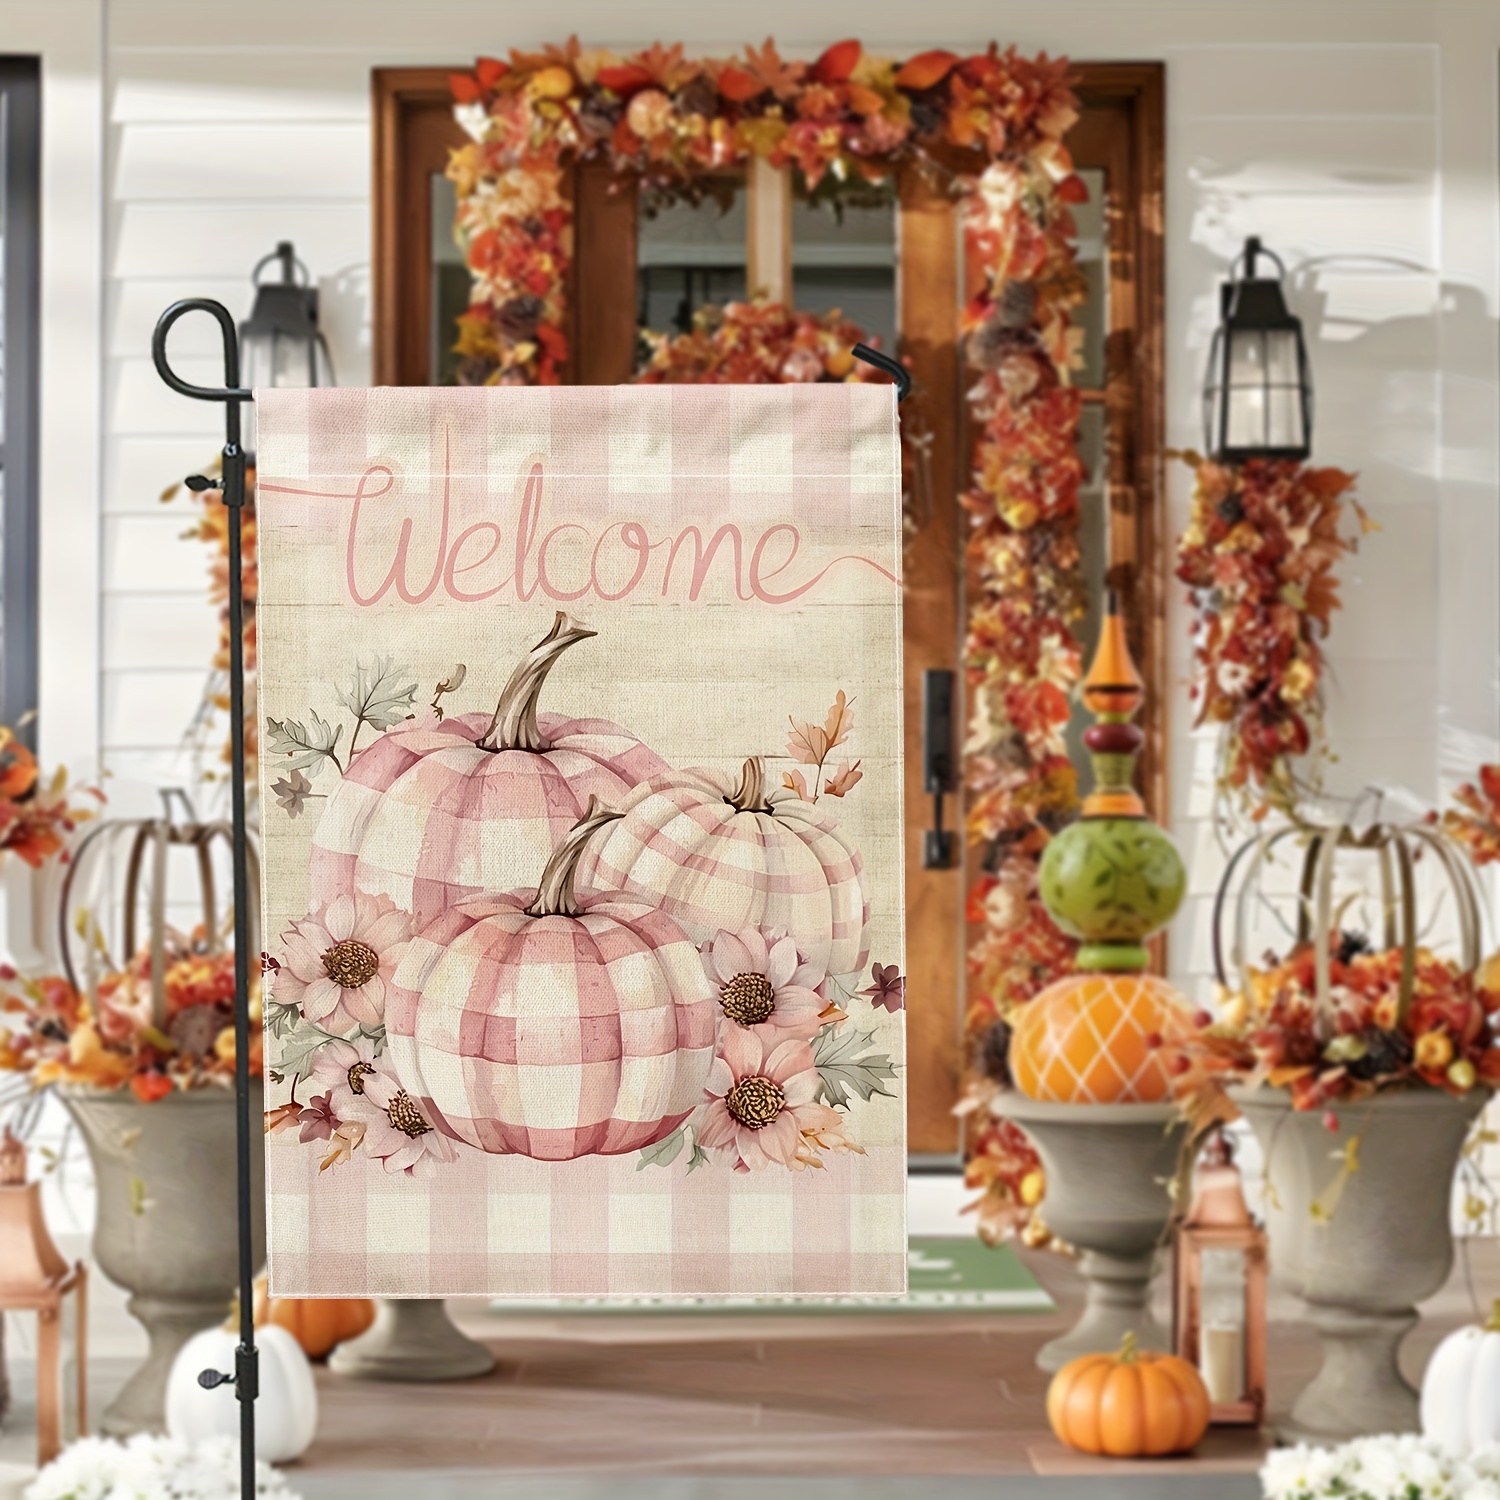 

Charming Double-sided Linen Garden Flag For Fall - Rustic Farmhouse Pumpkin & Floral Design, Light Pink, 12x18 Inches - Perfect For Autumn Porch & Patio Decor